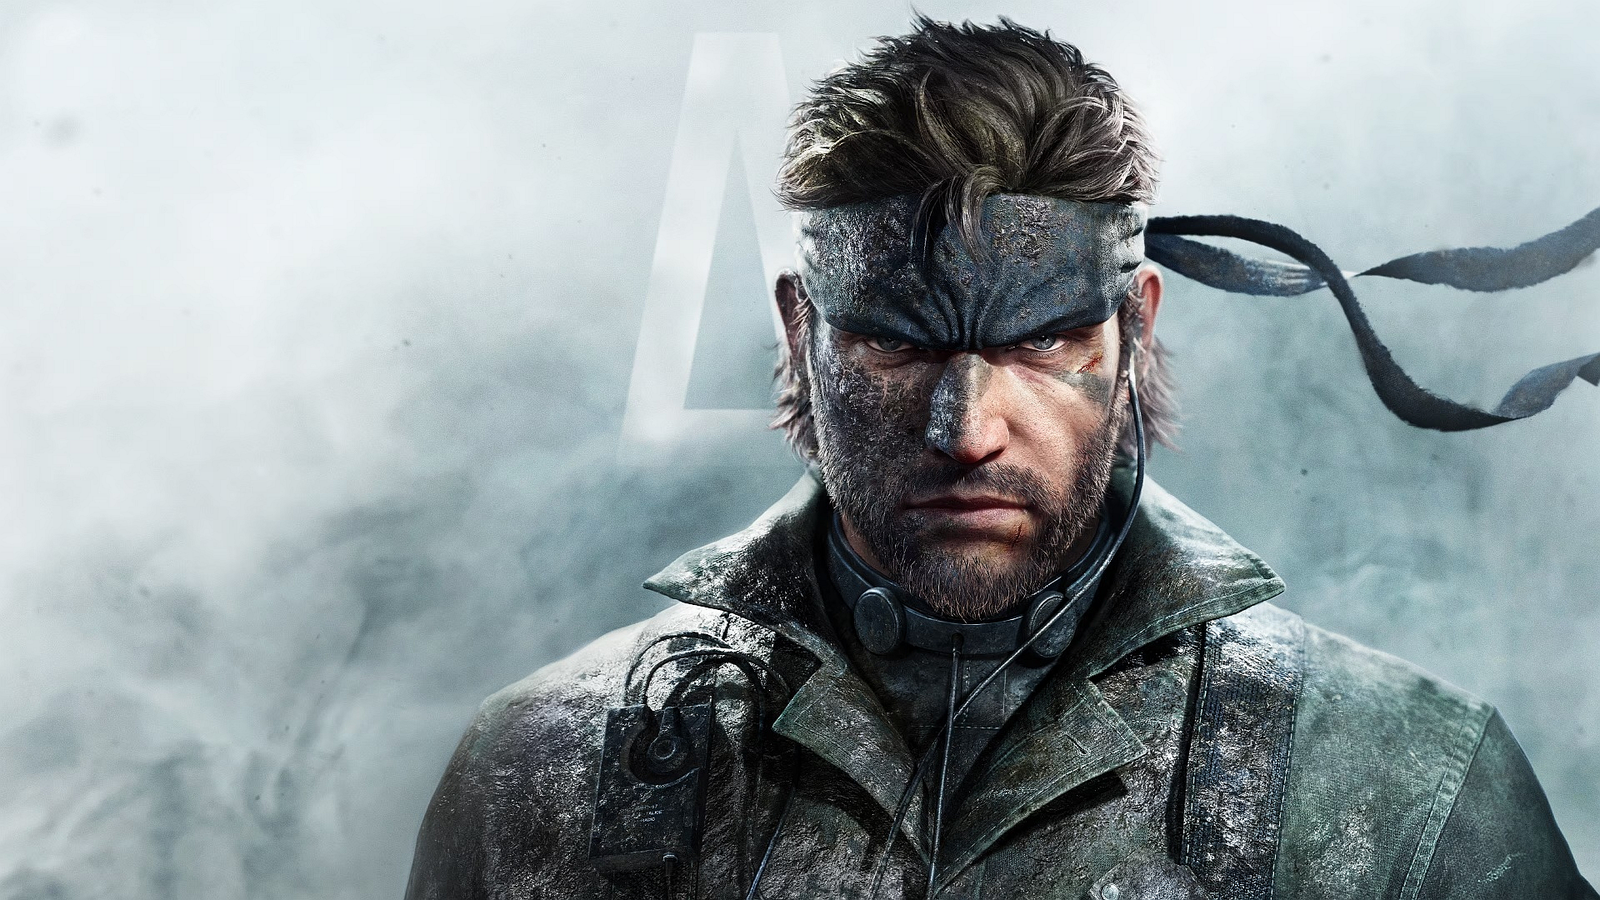 METAL GEAR SOLID Δ: SNAKE EATER - First In-Engine Look - Xbox